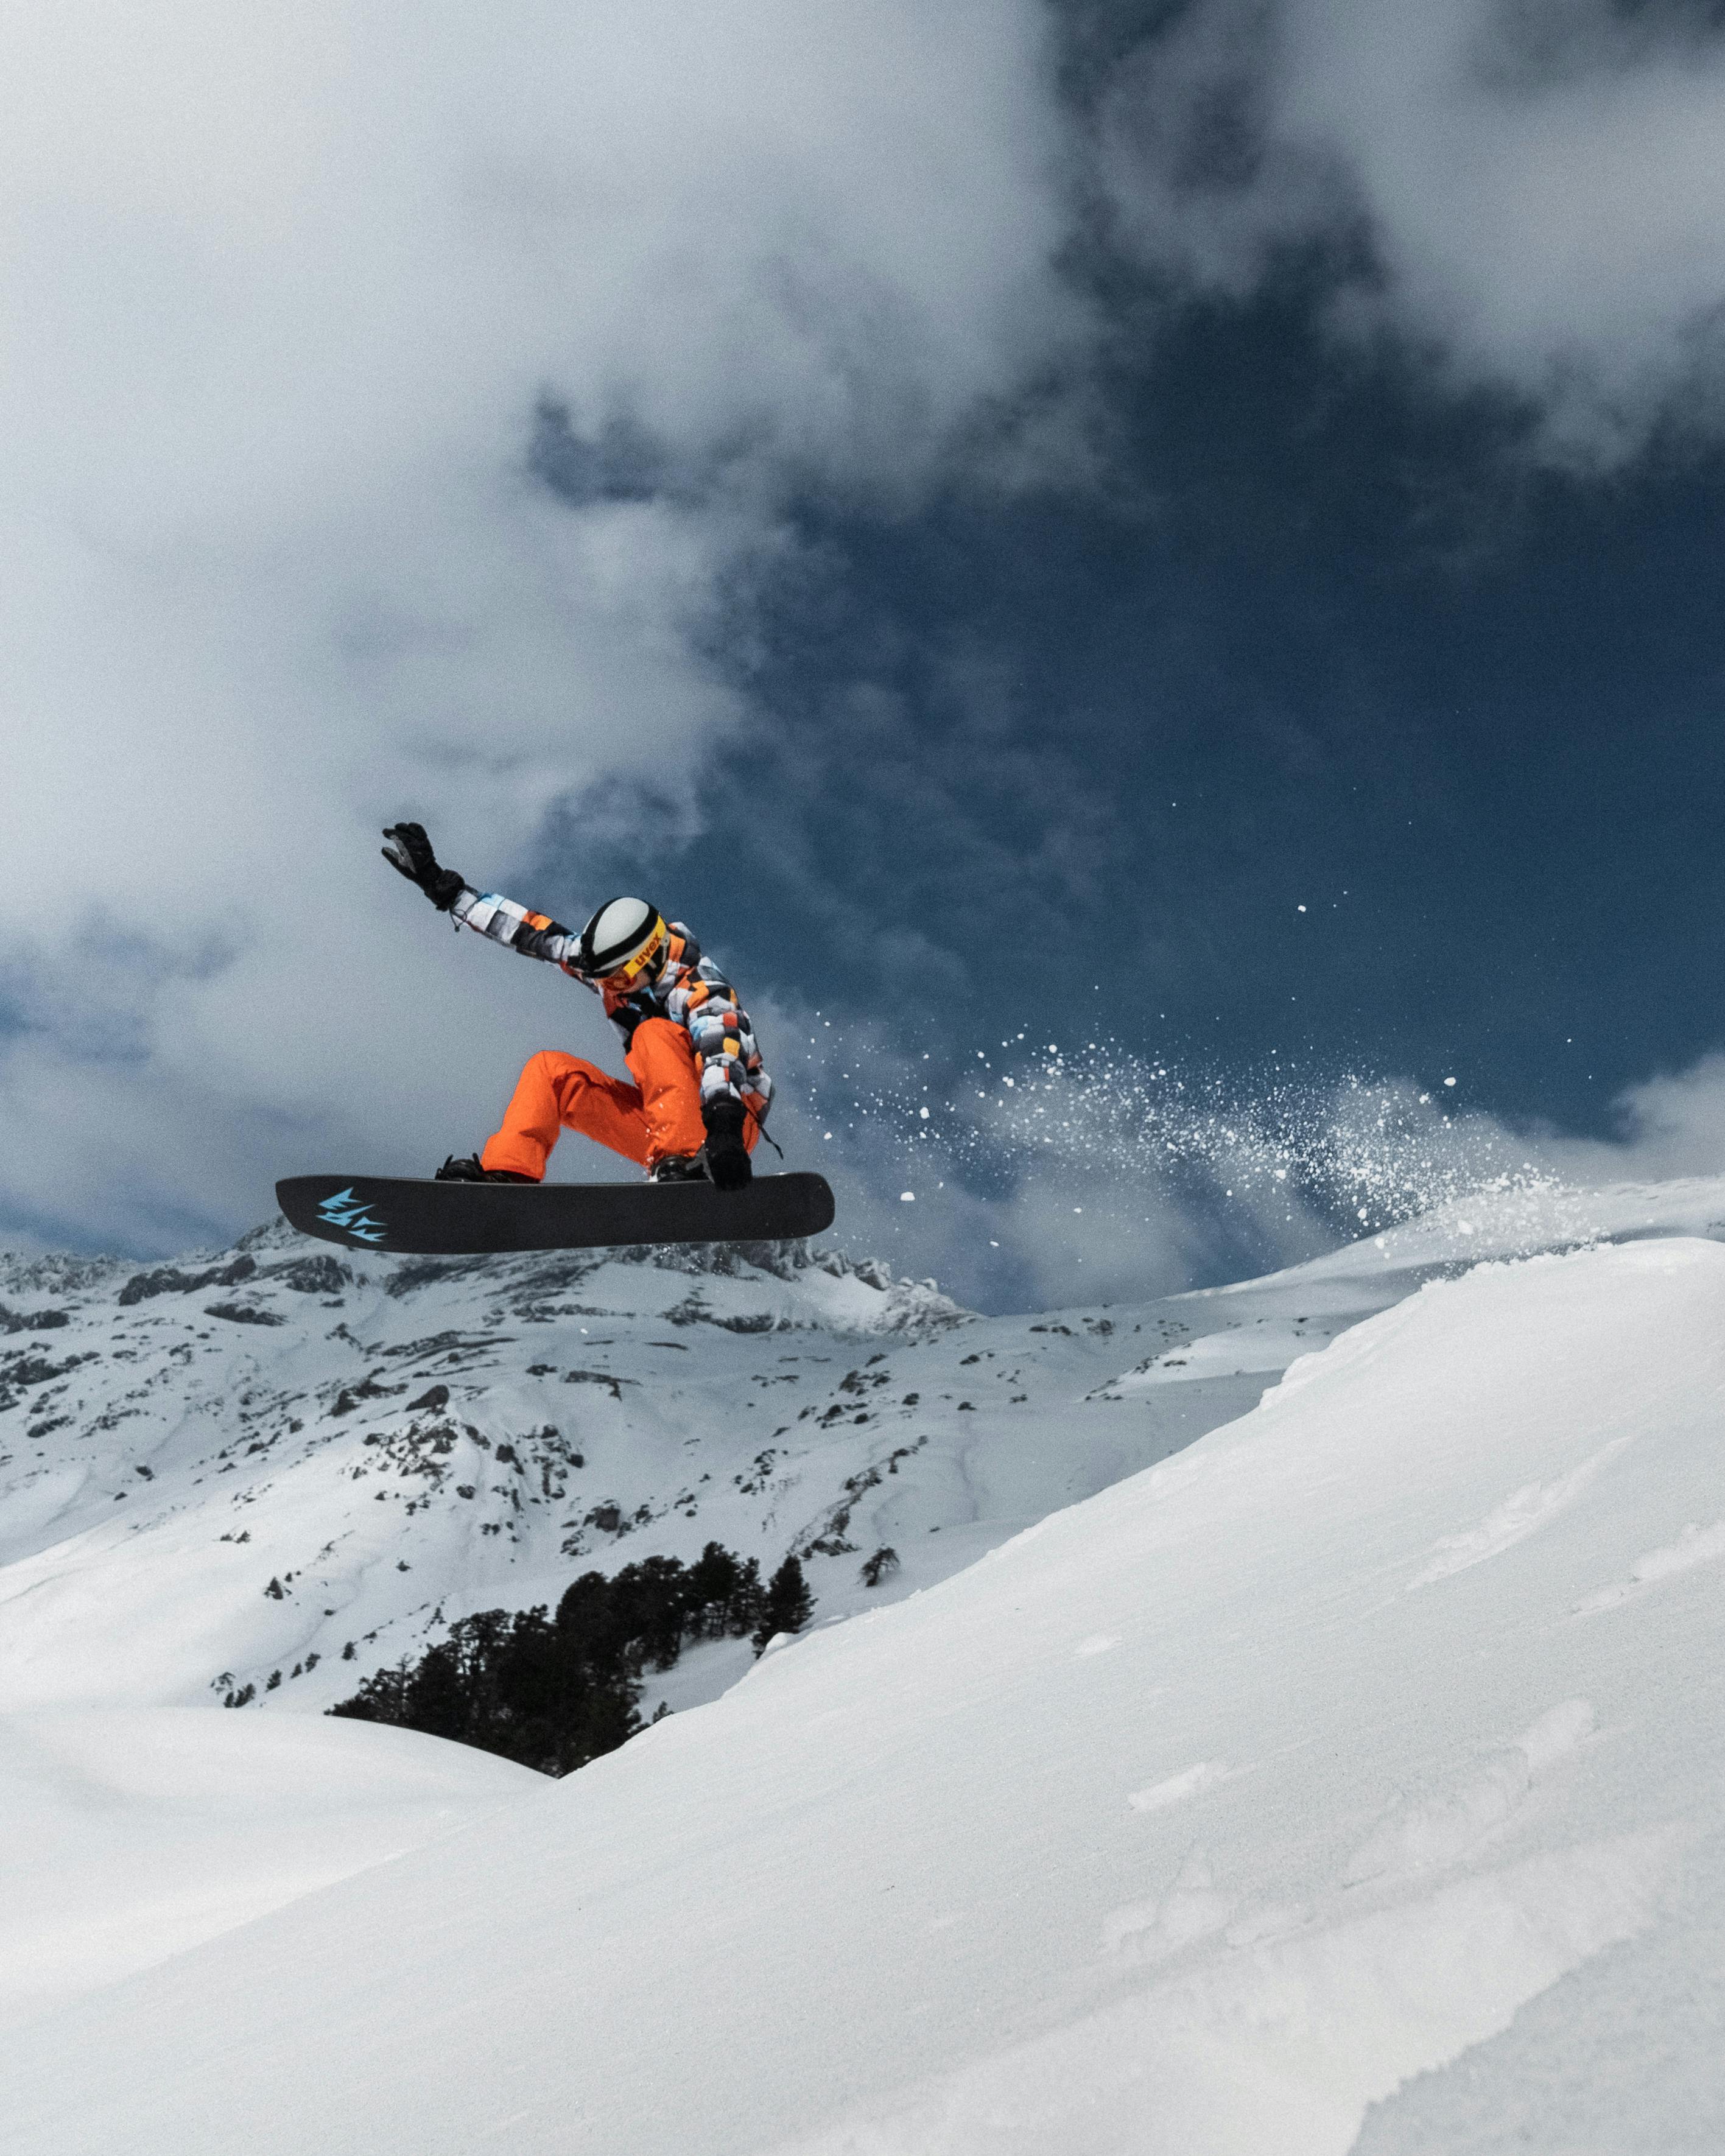 750 Snowboard Pictures HD  Download Free Images on Unsplash